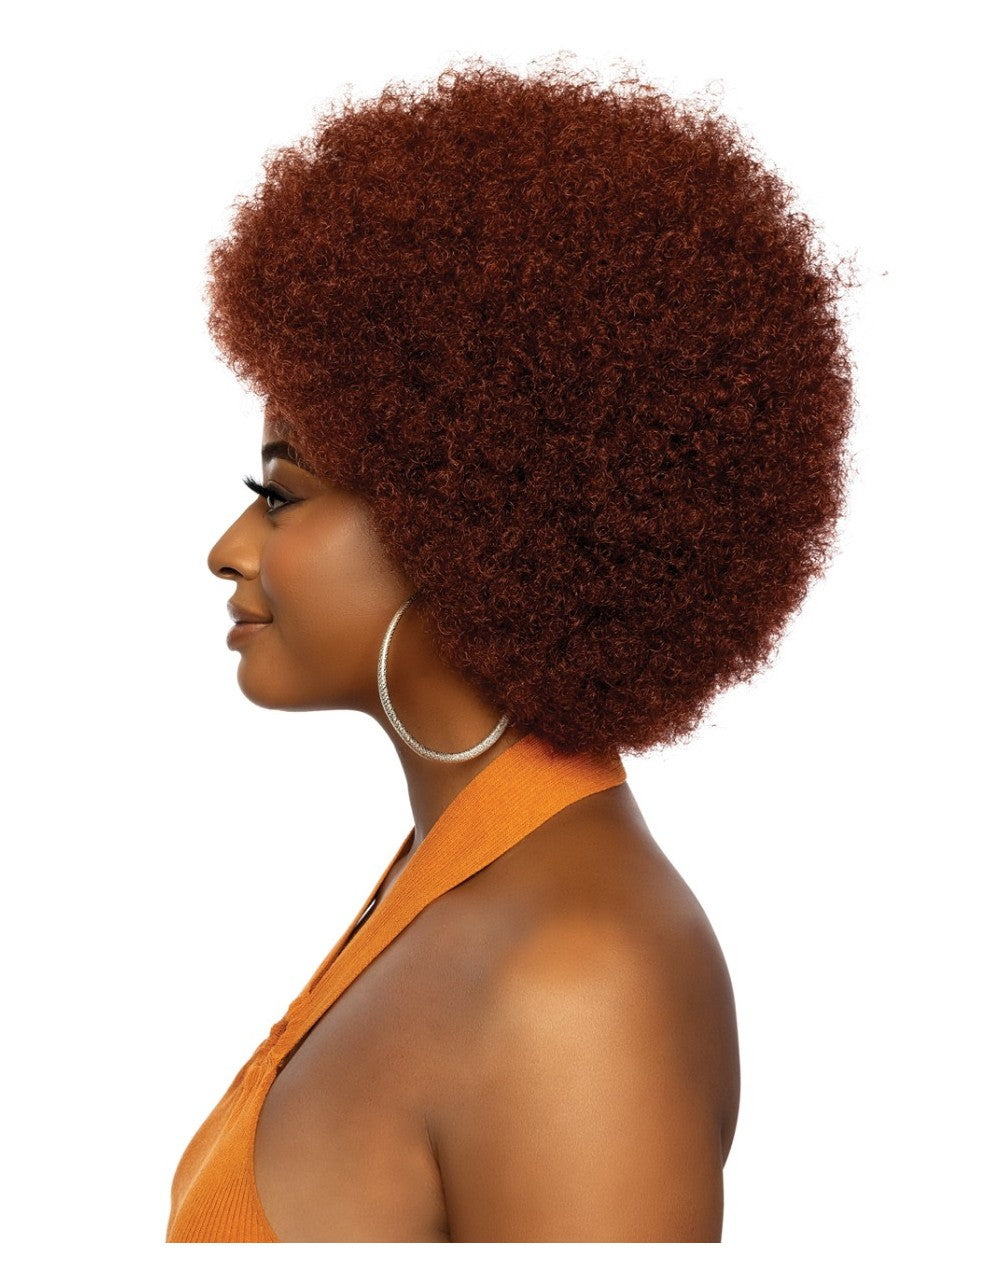 Mane Concept Red Carpet Afro Style Full Wig - AFRO CURLY RCP1081 - Elevate Styles